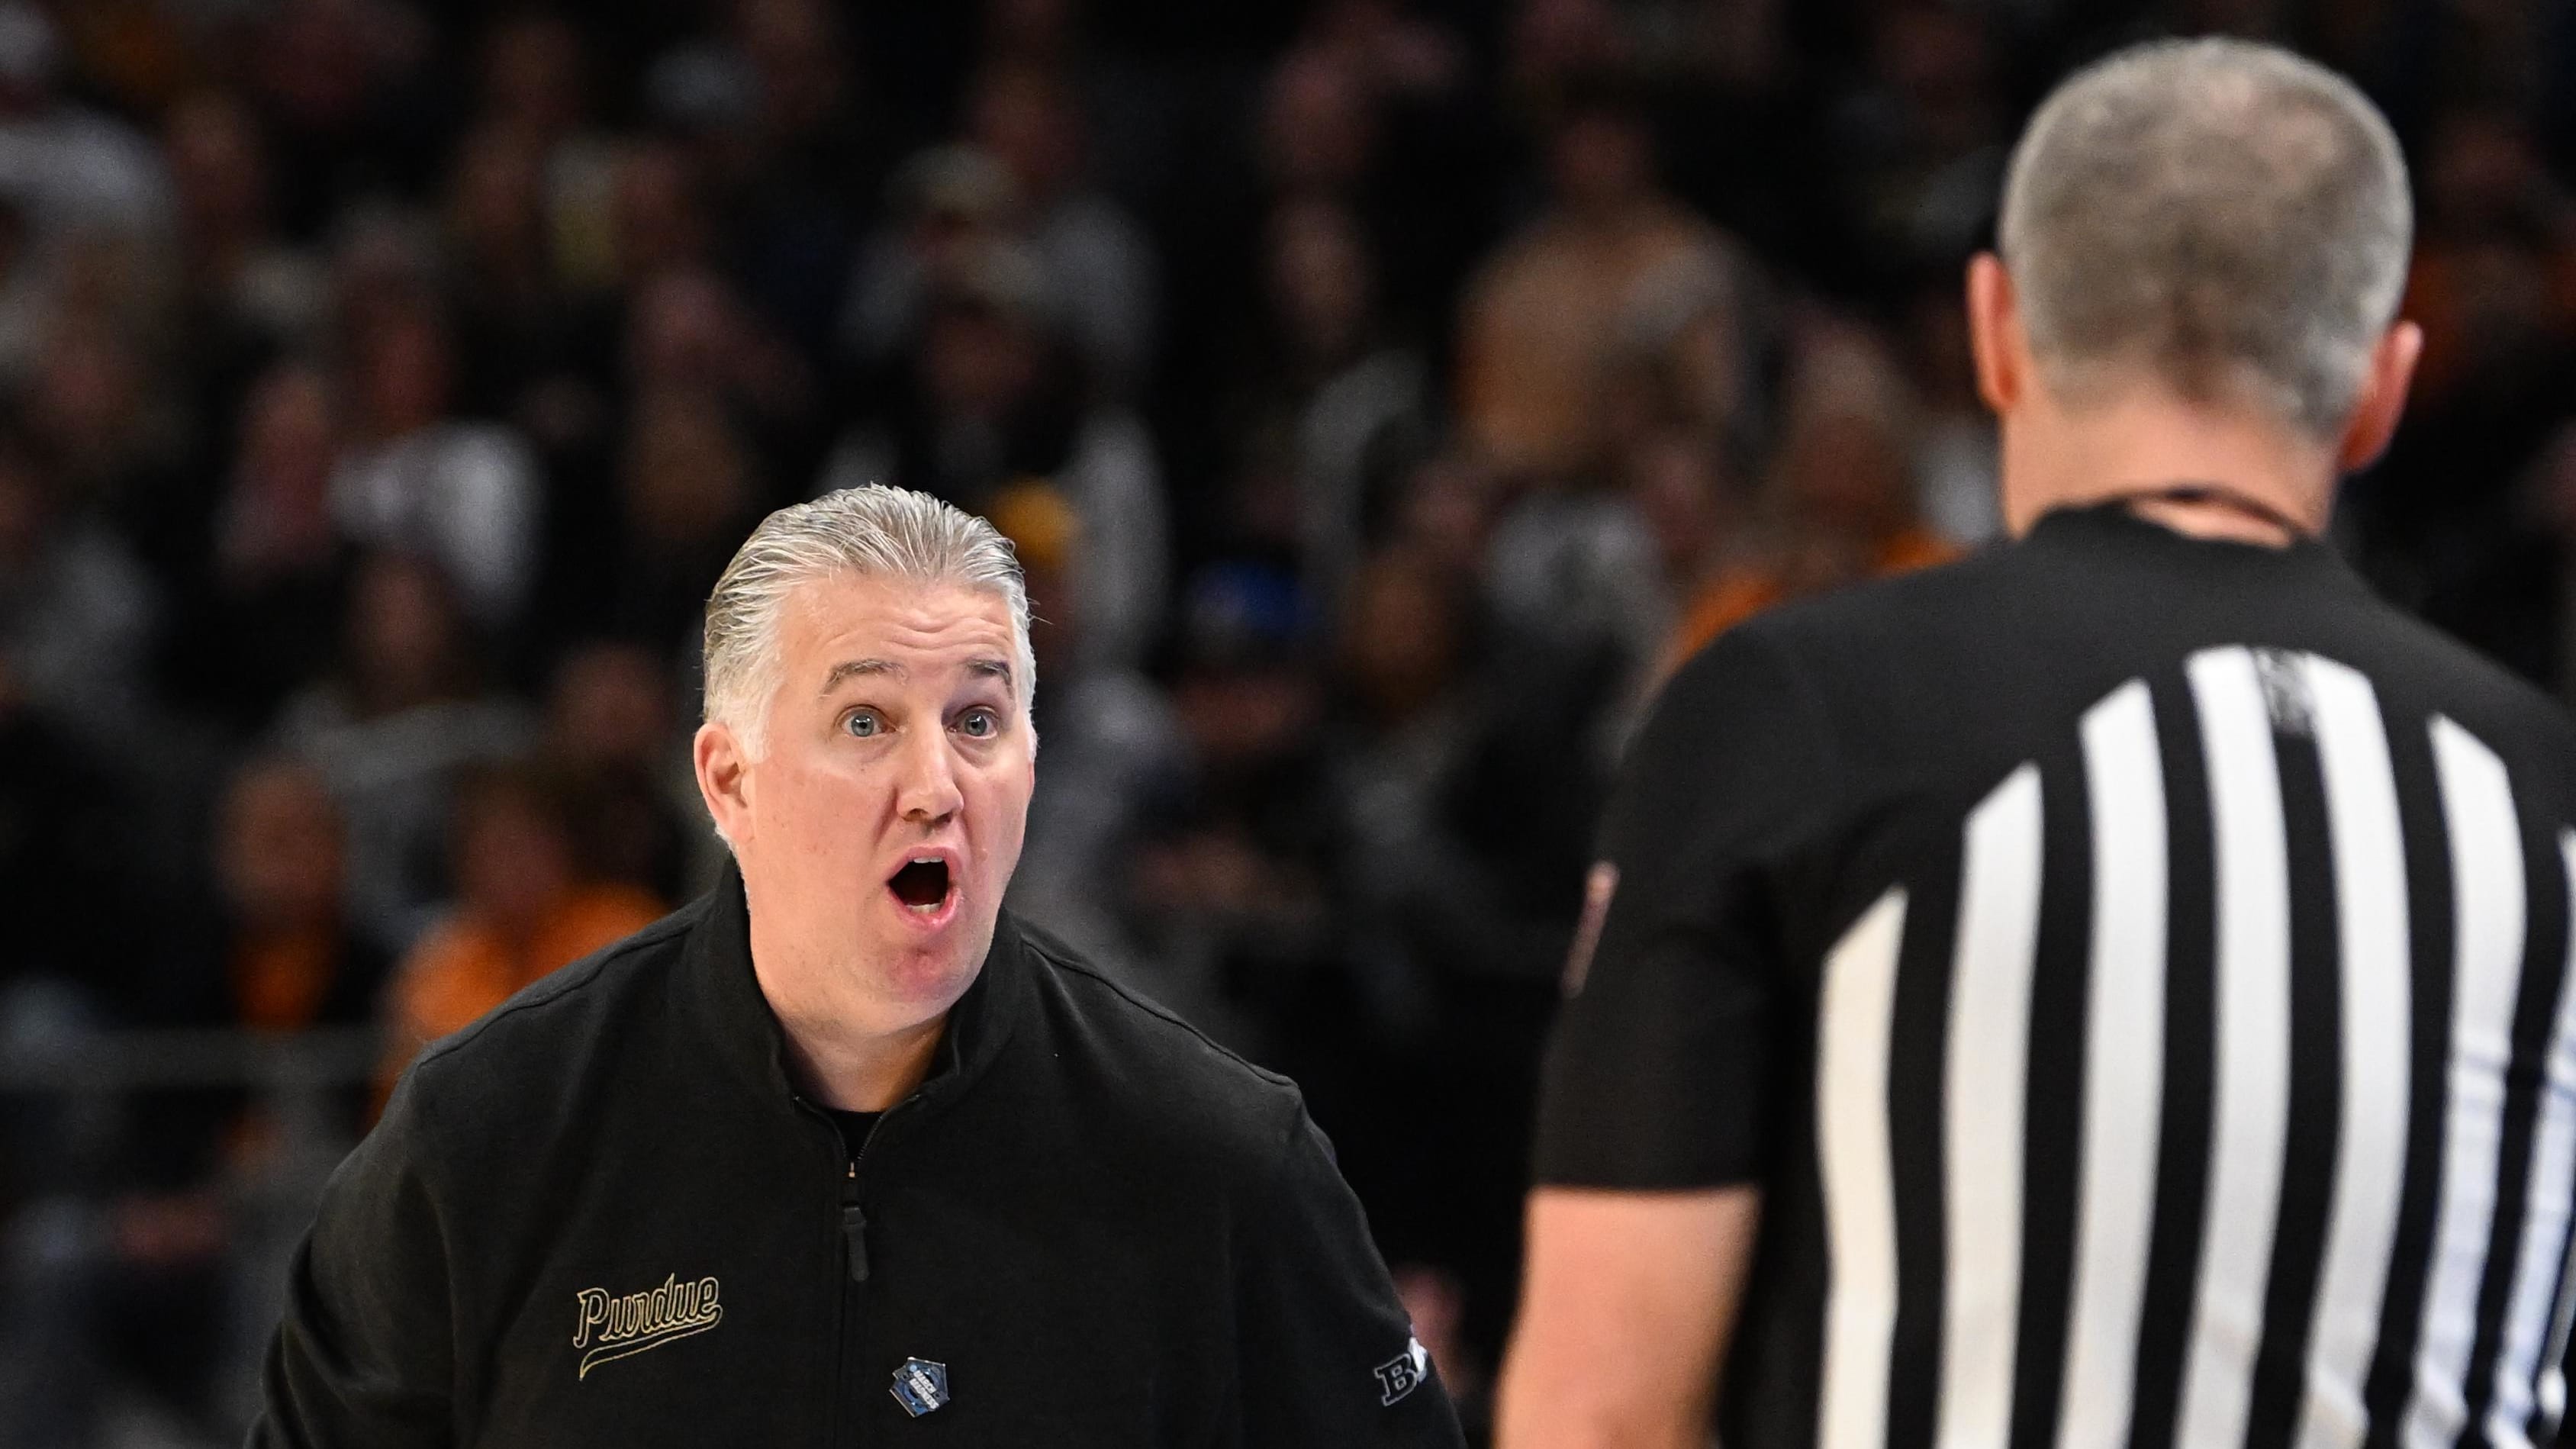  Purdue coach Matt Painter reacts to an official's call in the first half of their win over Tennessee on Sunday.